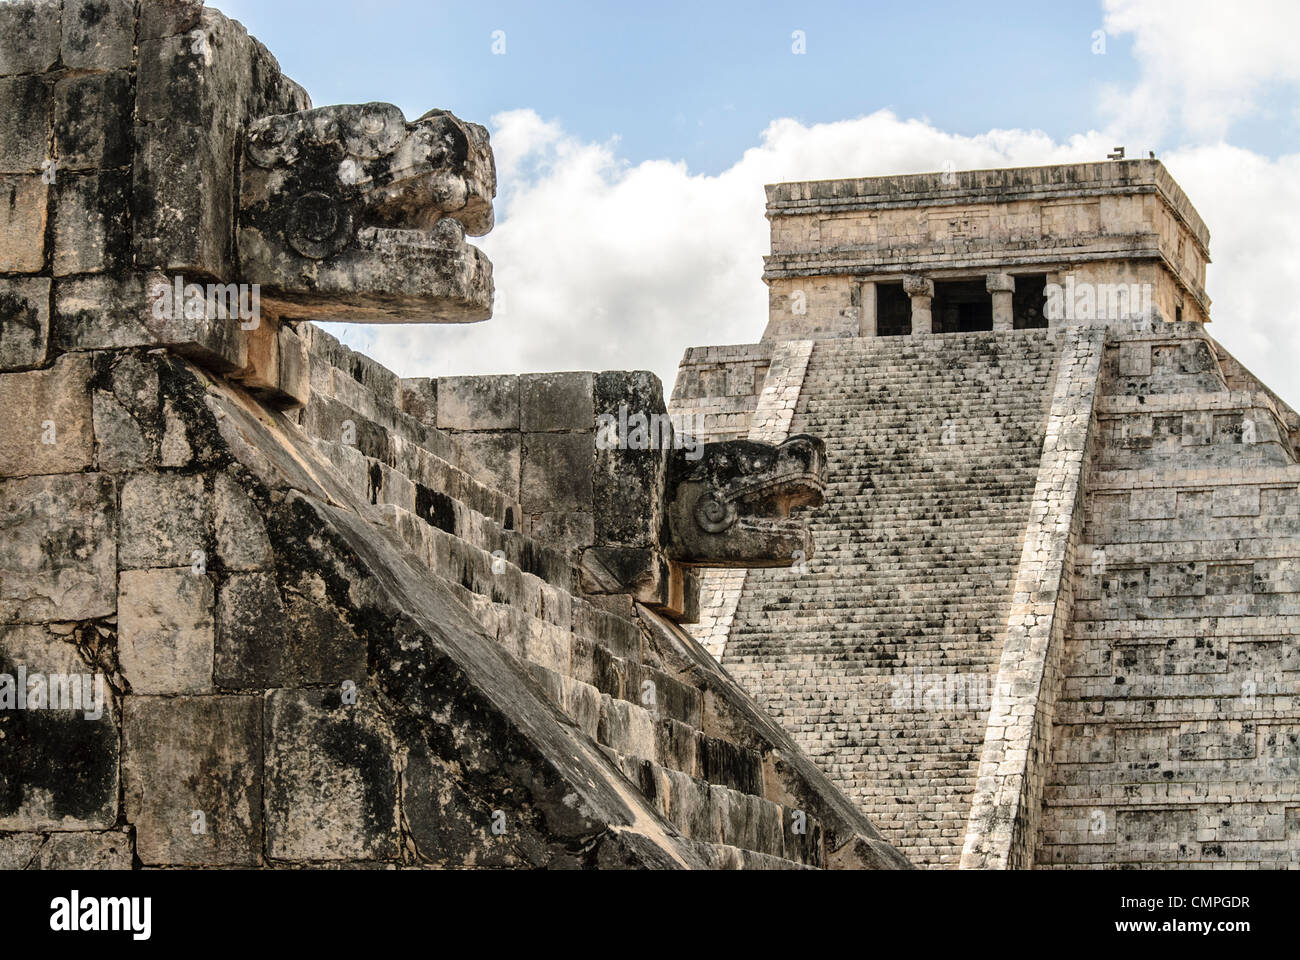 CHICHEN ITZA, Mexico - In the background at right is the Temple of Kukulkan (El Castillo) and at left in the foreground are two carved jaguar heads of the Venus Platform at Chichen Itza Archeological Zone, ruins of a major Maya civilization city in the heart of Mexico's Yucatan Peninsula. Stock Photo